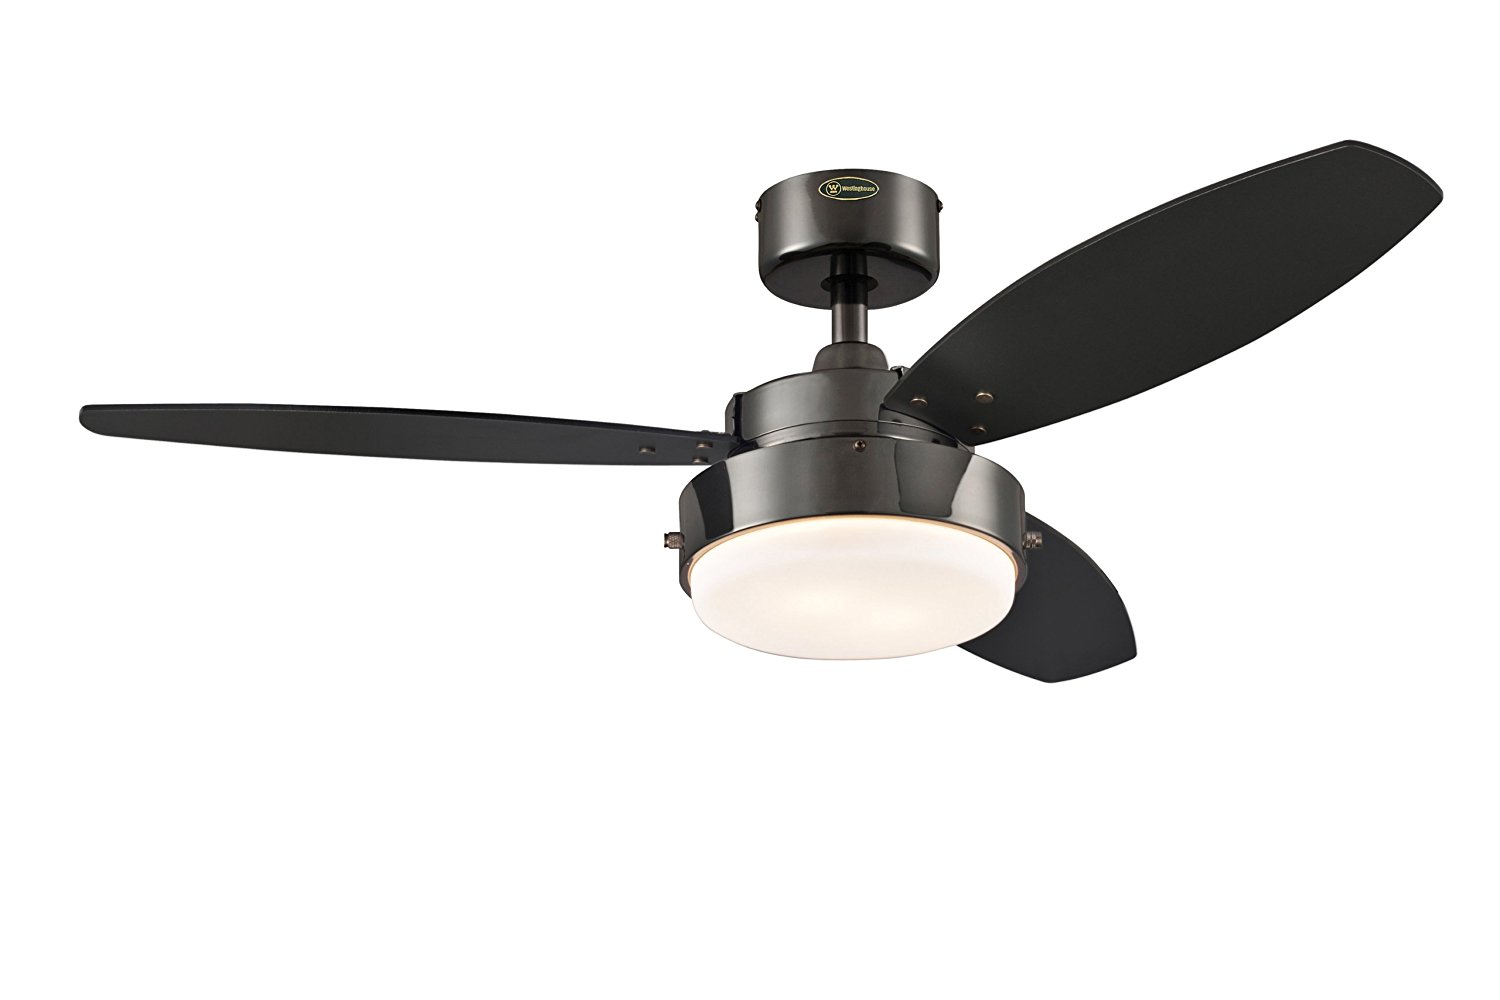 7876400 Alloy 42-Inch Gun Metal Indoor Ceiling Fan, Light Kit with Opal Frosted Glass